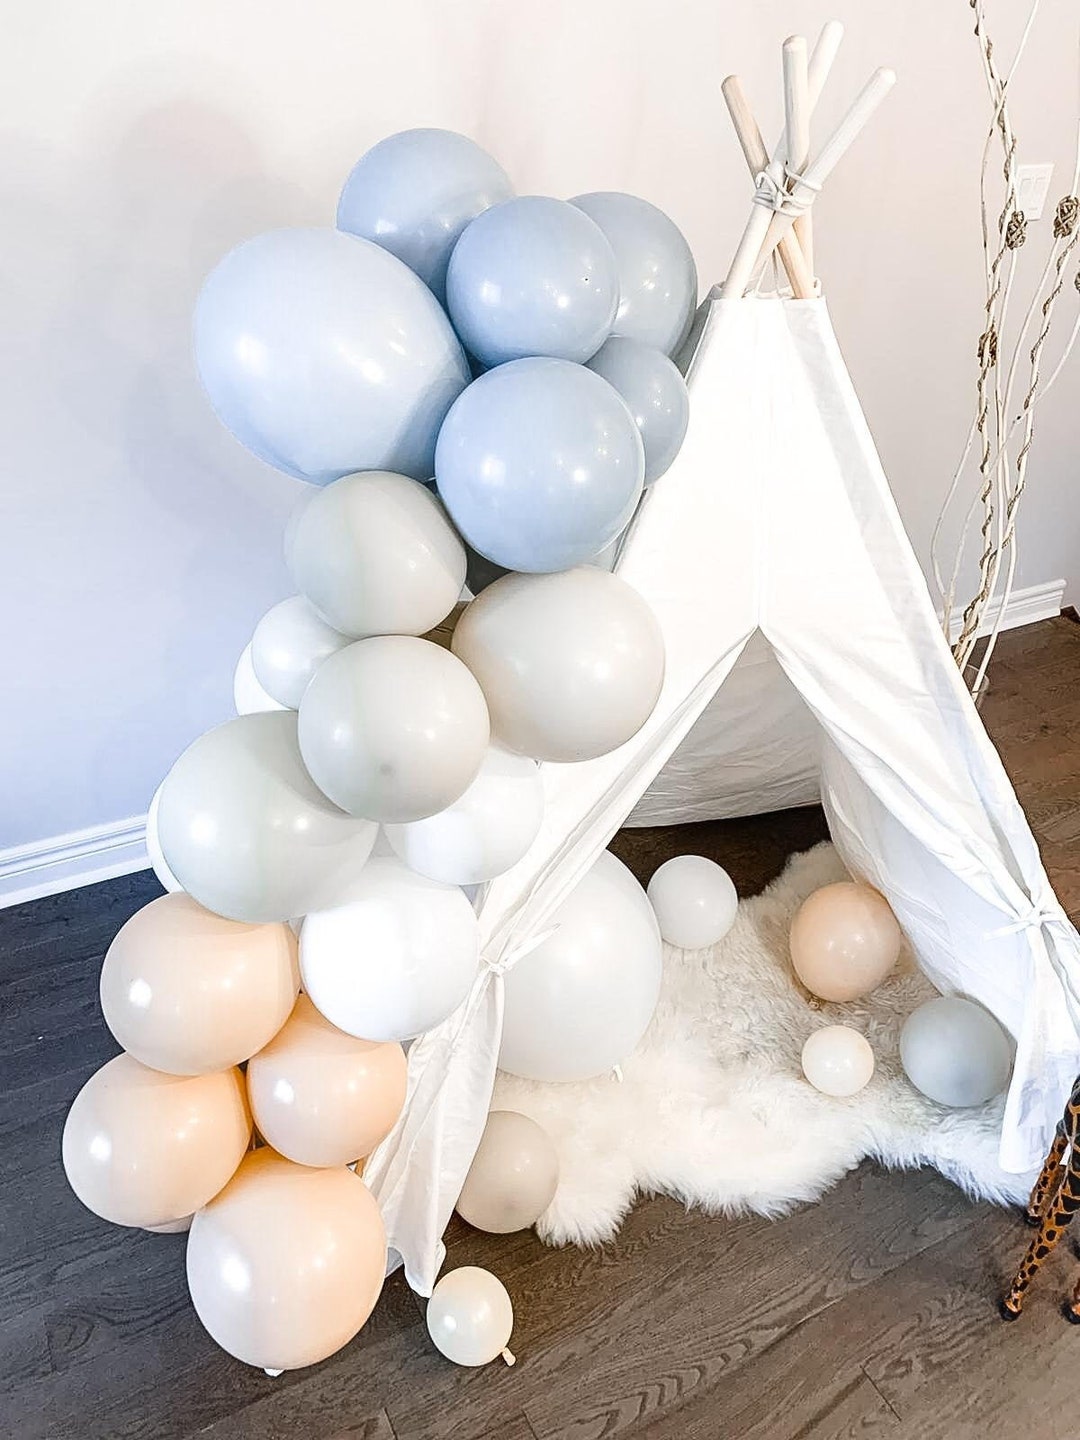 How to Make a Balloon Arch WITHOUT Helium or Frame - Fishing Line Balloon  Arch